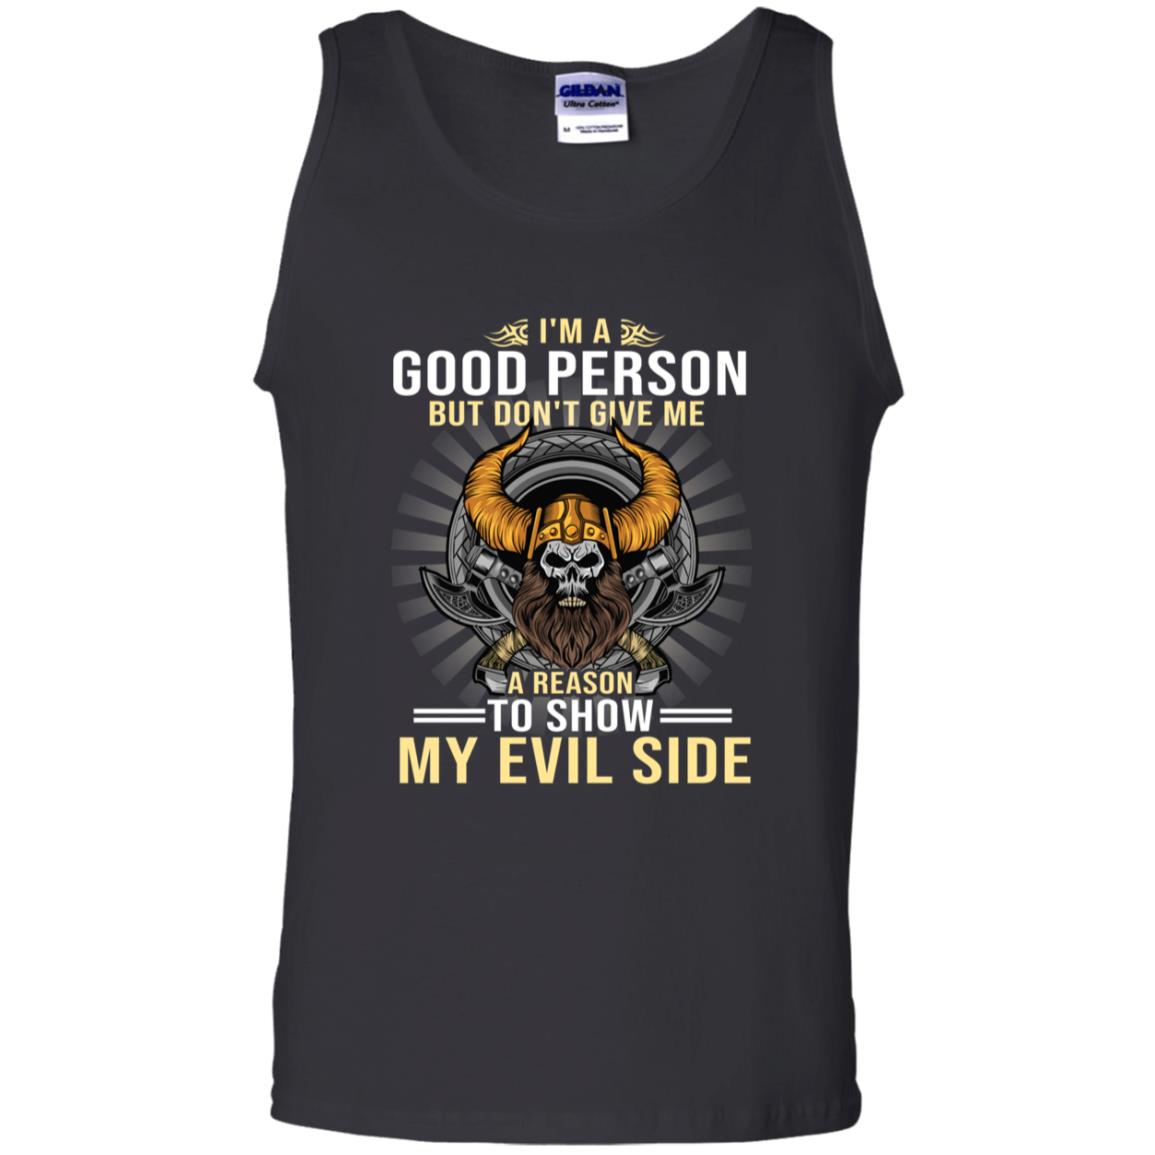 I'm A Good Person But Don't Give Me A Reason To Show My Evil SideG220 Gildan 100% Cotton Tank Top